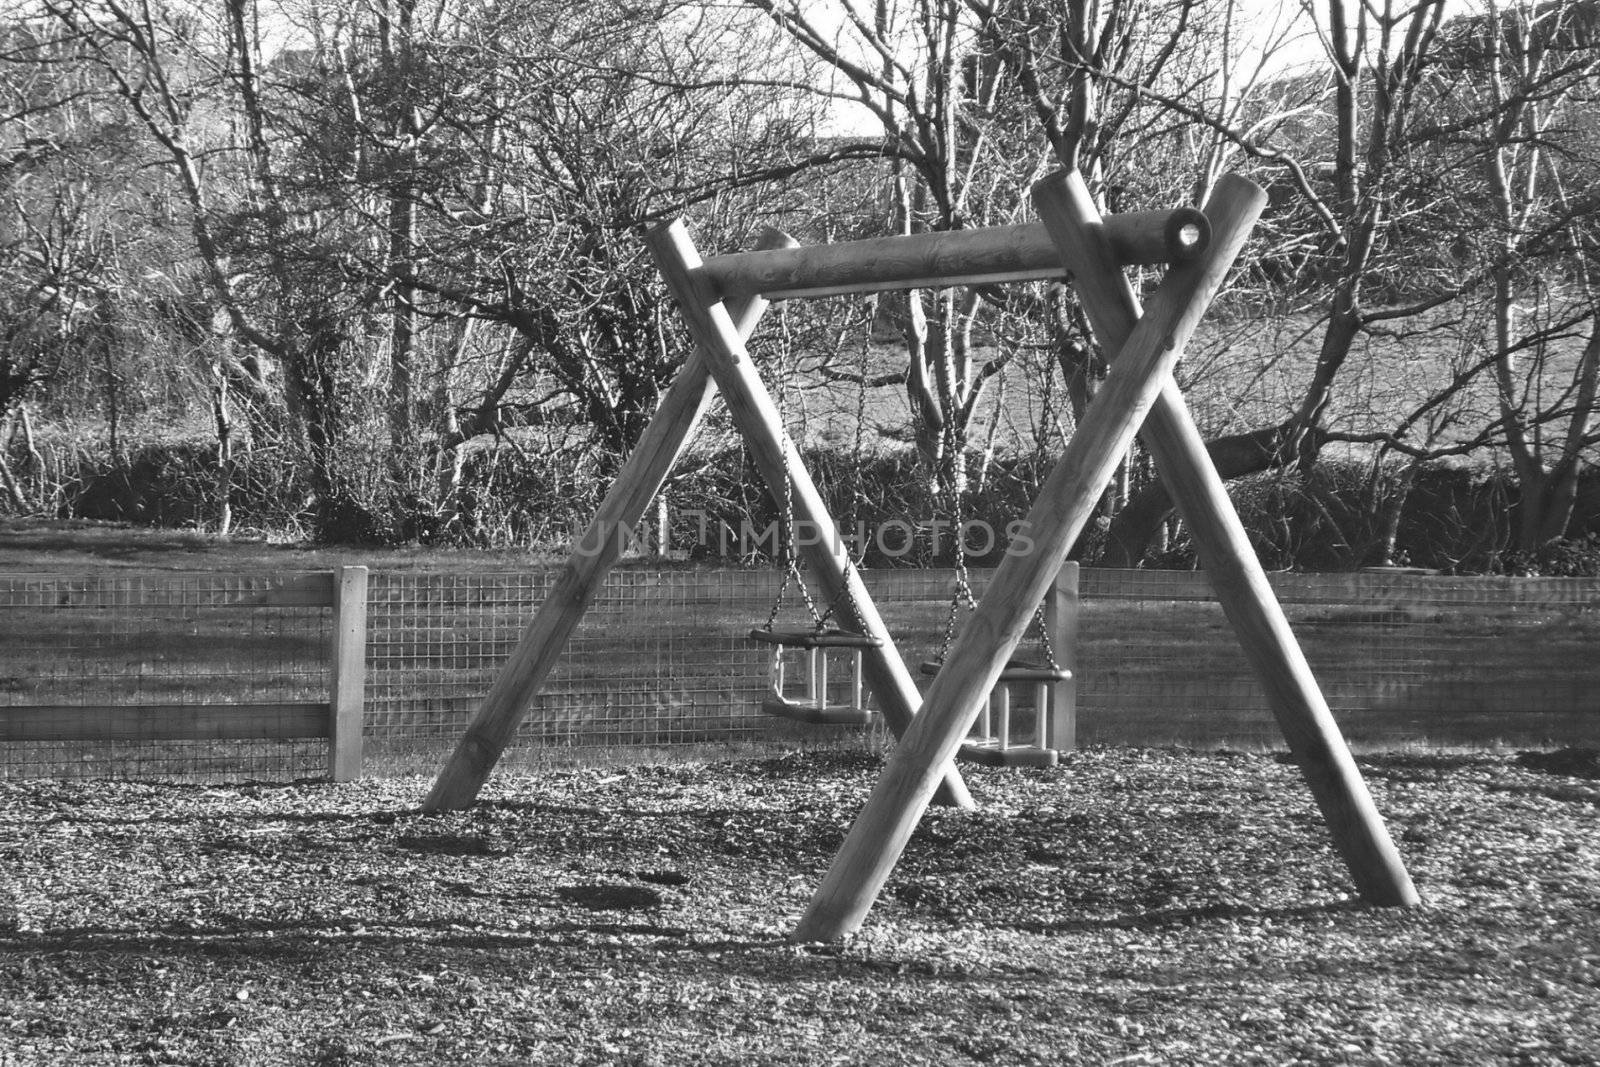 wooden climbing frame by leafy